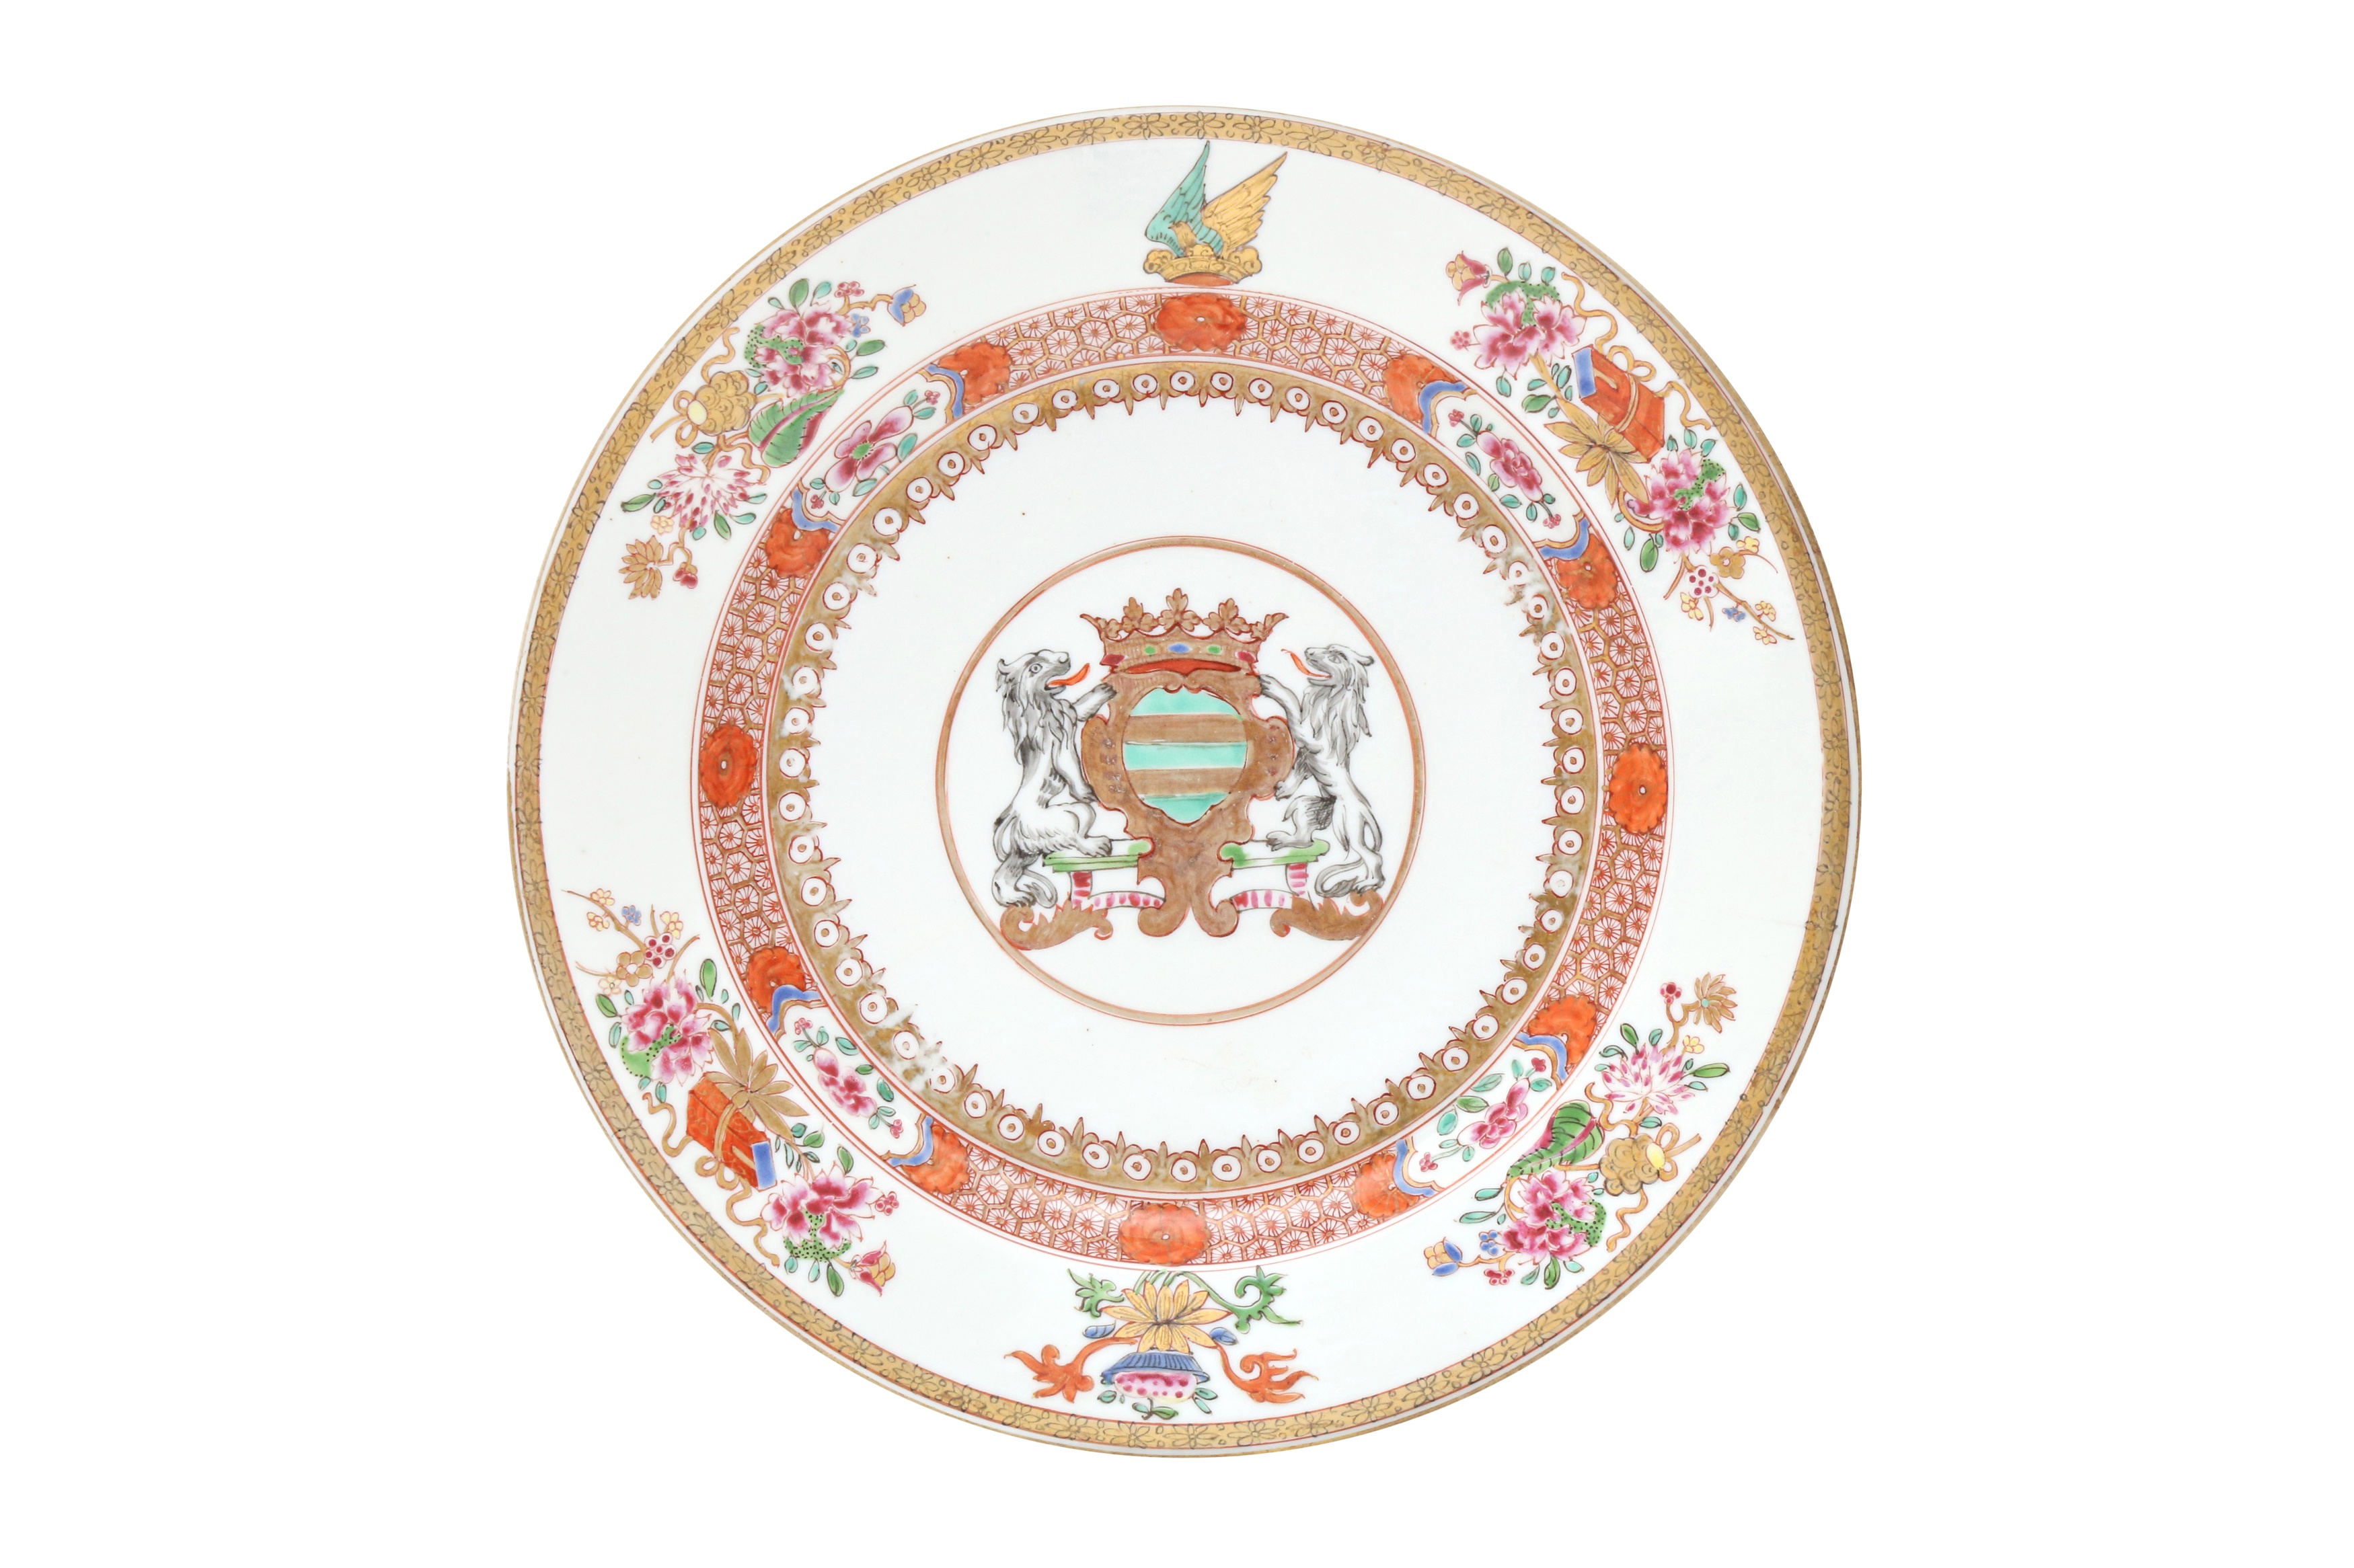 A PAIR OF CHINESE EXPORT FAMILLE-ROSE ARMORIAL DISHES 清十八至十九世紀 外銷粉彩徽章紋盤一對 - Image 2 of 3